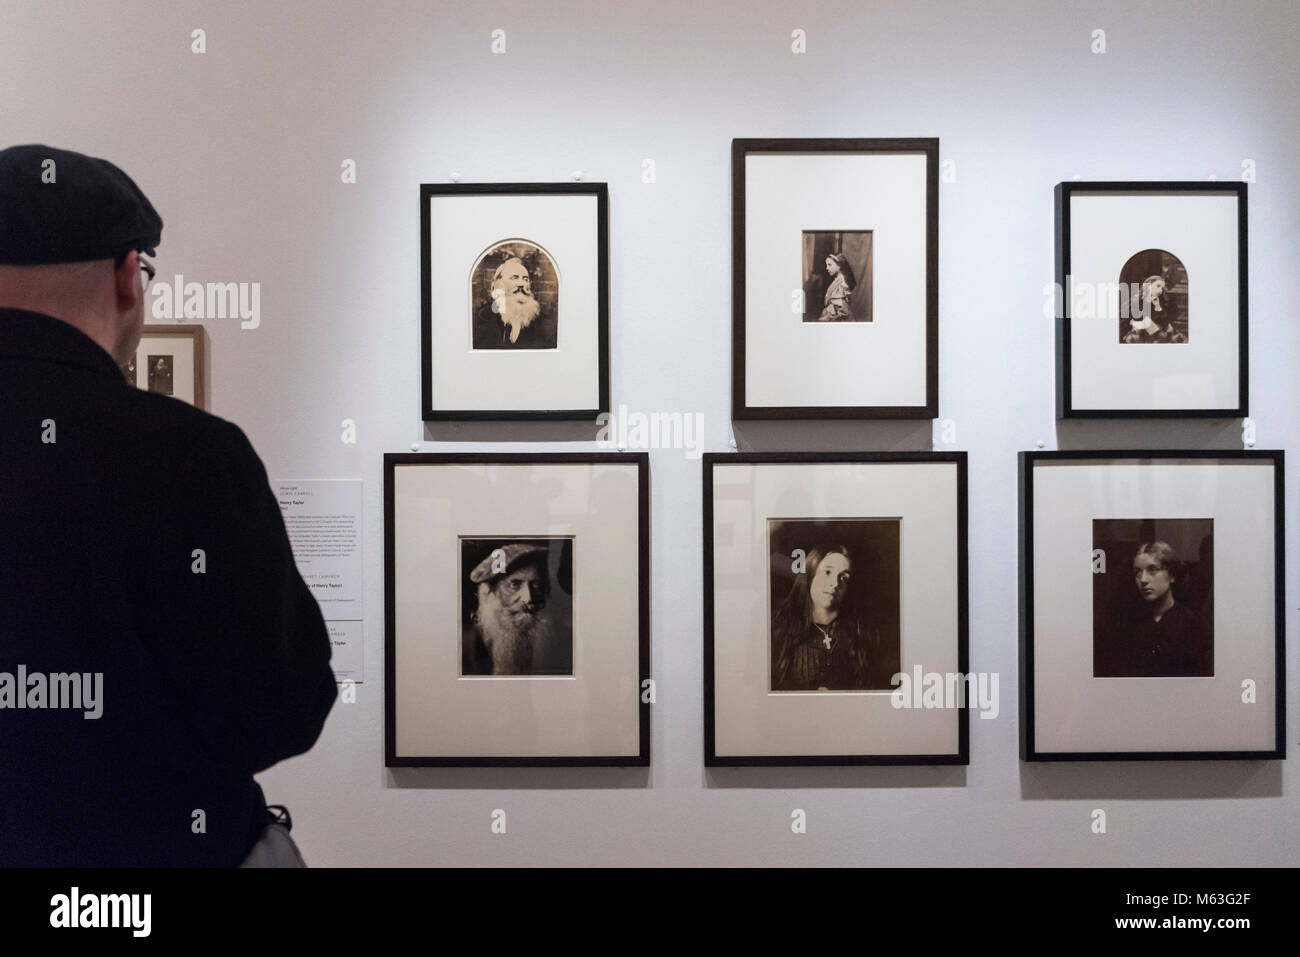 London, UK.  28 February 2018. A visitor views images at the preview of "Victorian Giants:  The Birth of Art Photography" at the National Portrait Gallery featuring works by Lewis Carroll, Julia Margaret Cameron, Oscar Rejlander and Clementina Hawarden. Credit: Stephen Chung/Alamy Live News Stock Photo